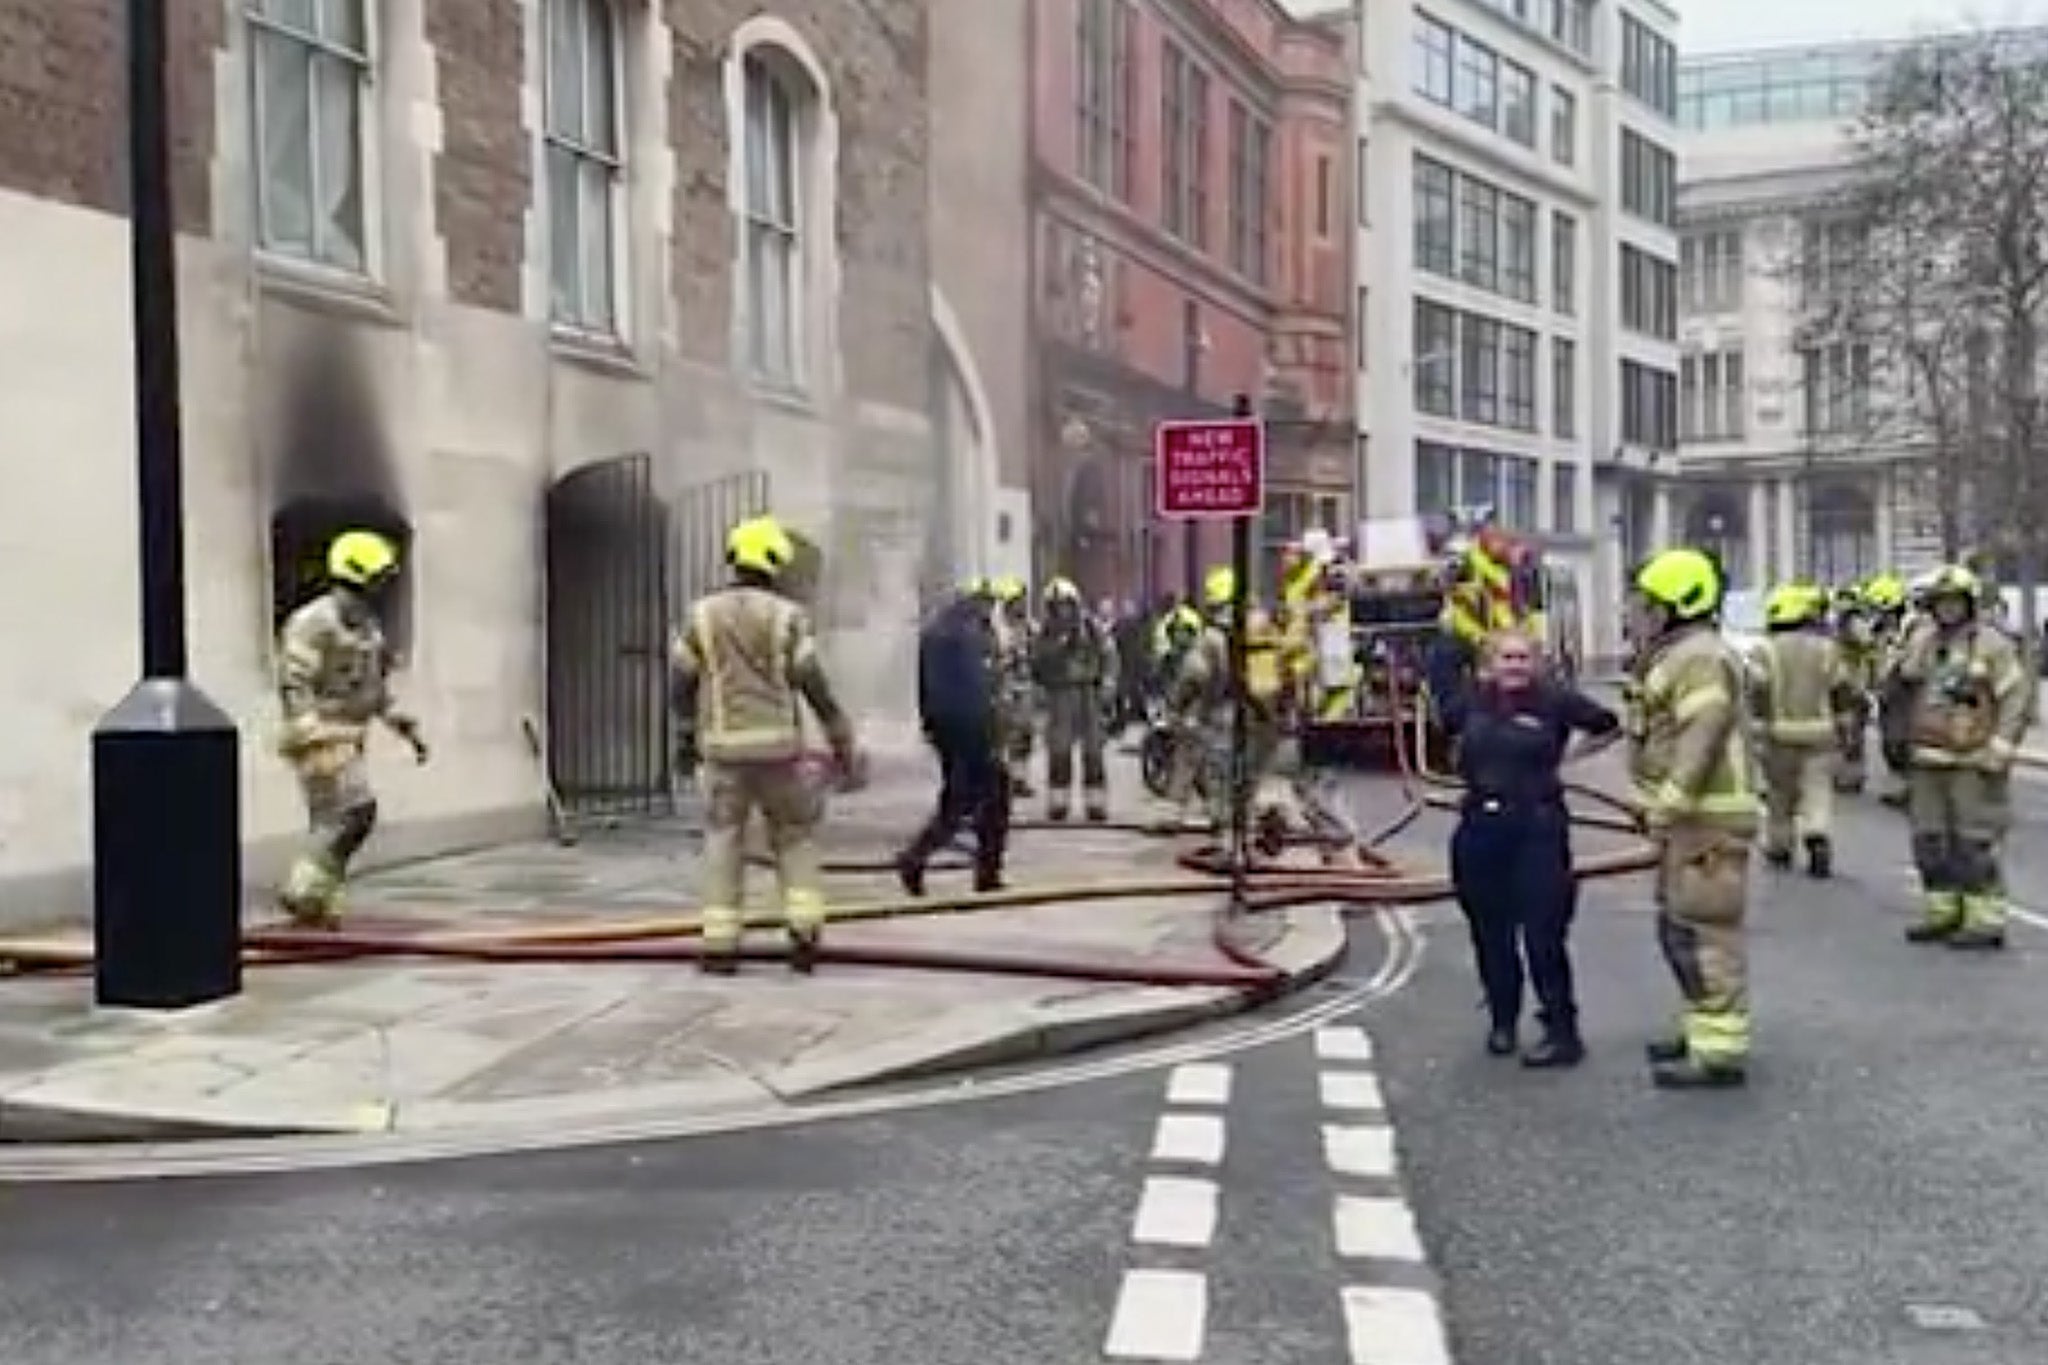 Firemen at the Old Bailey following a fire in an electrical substation